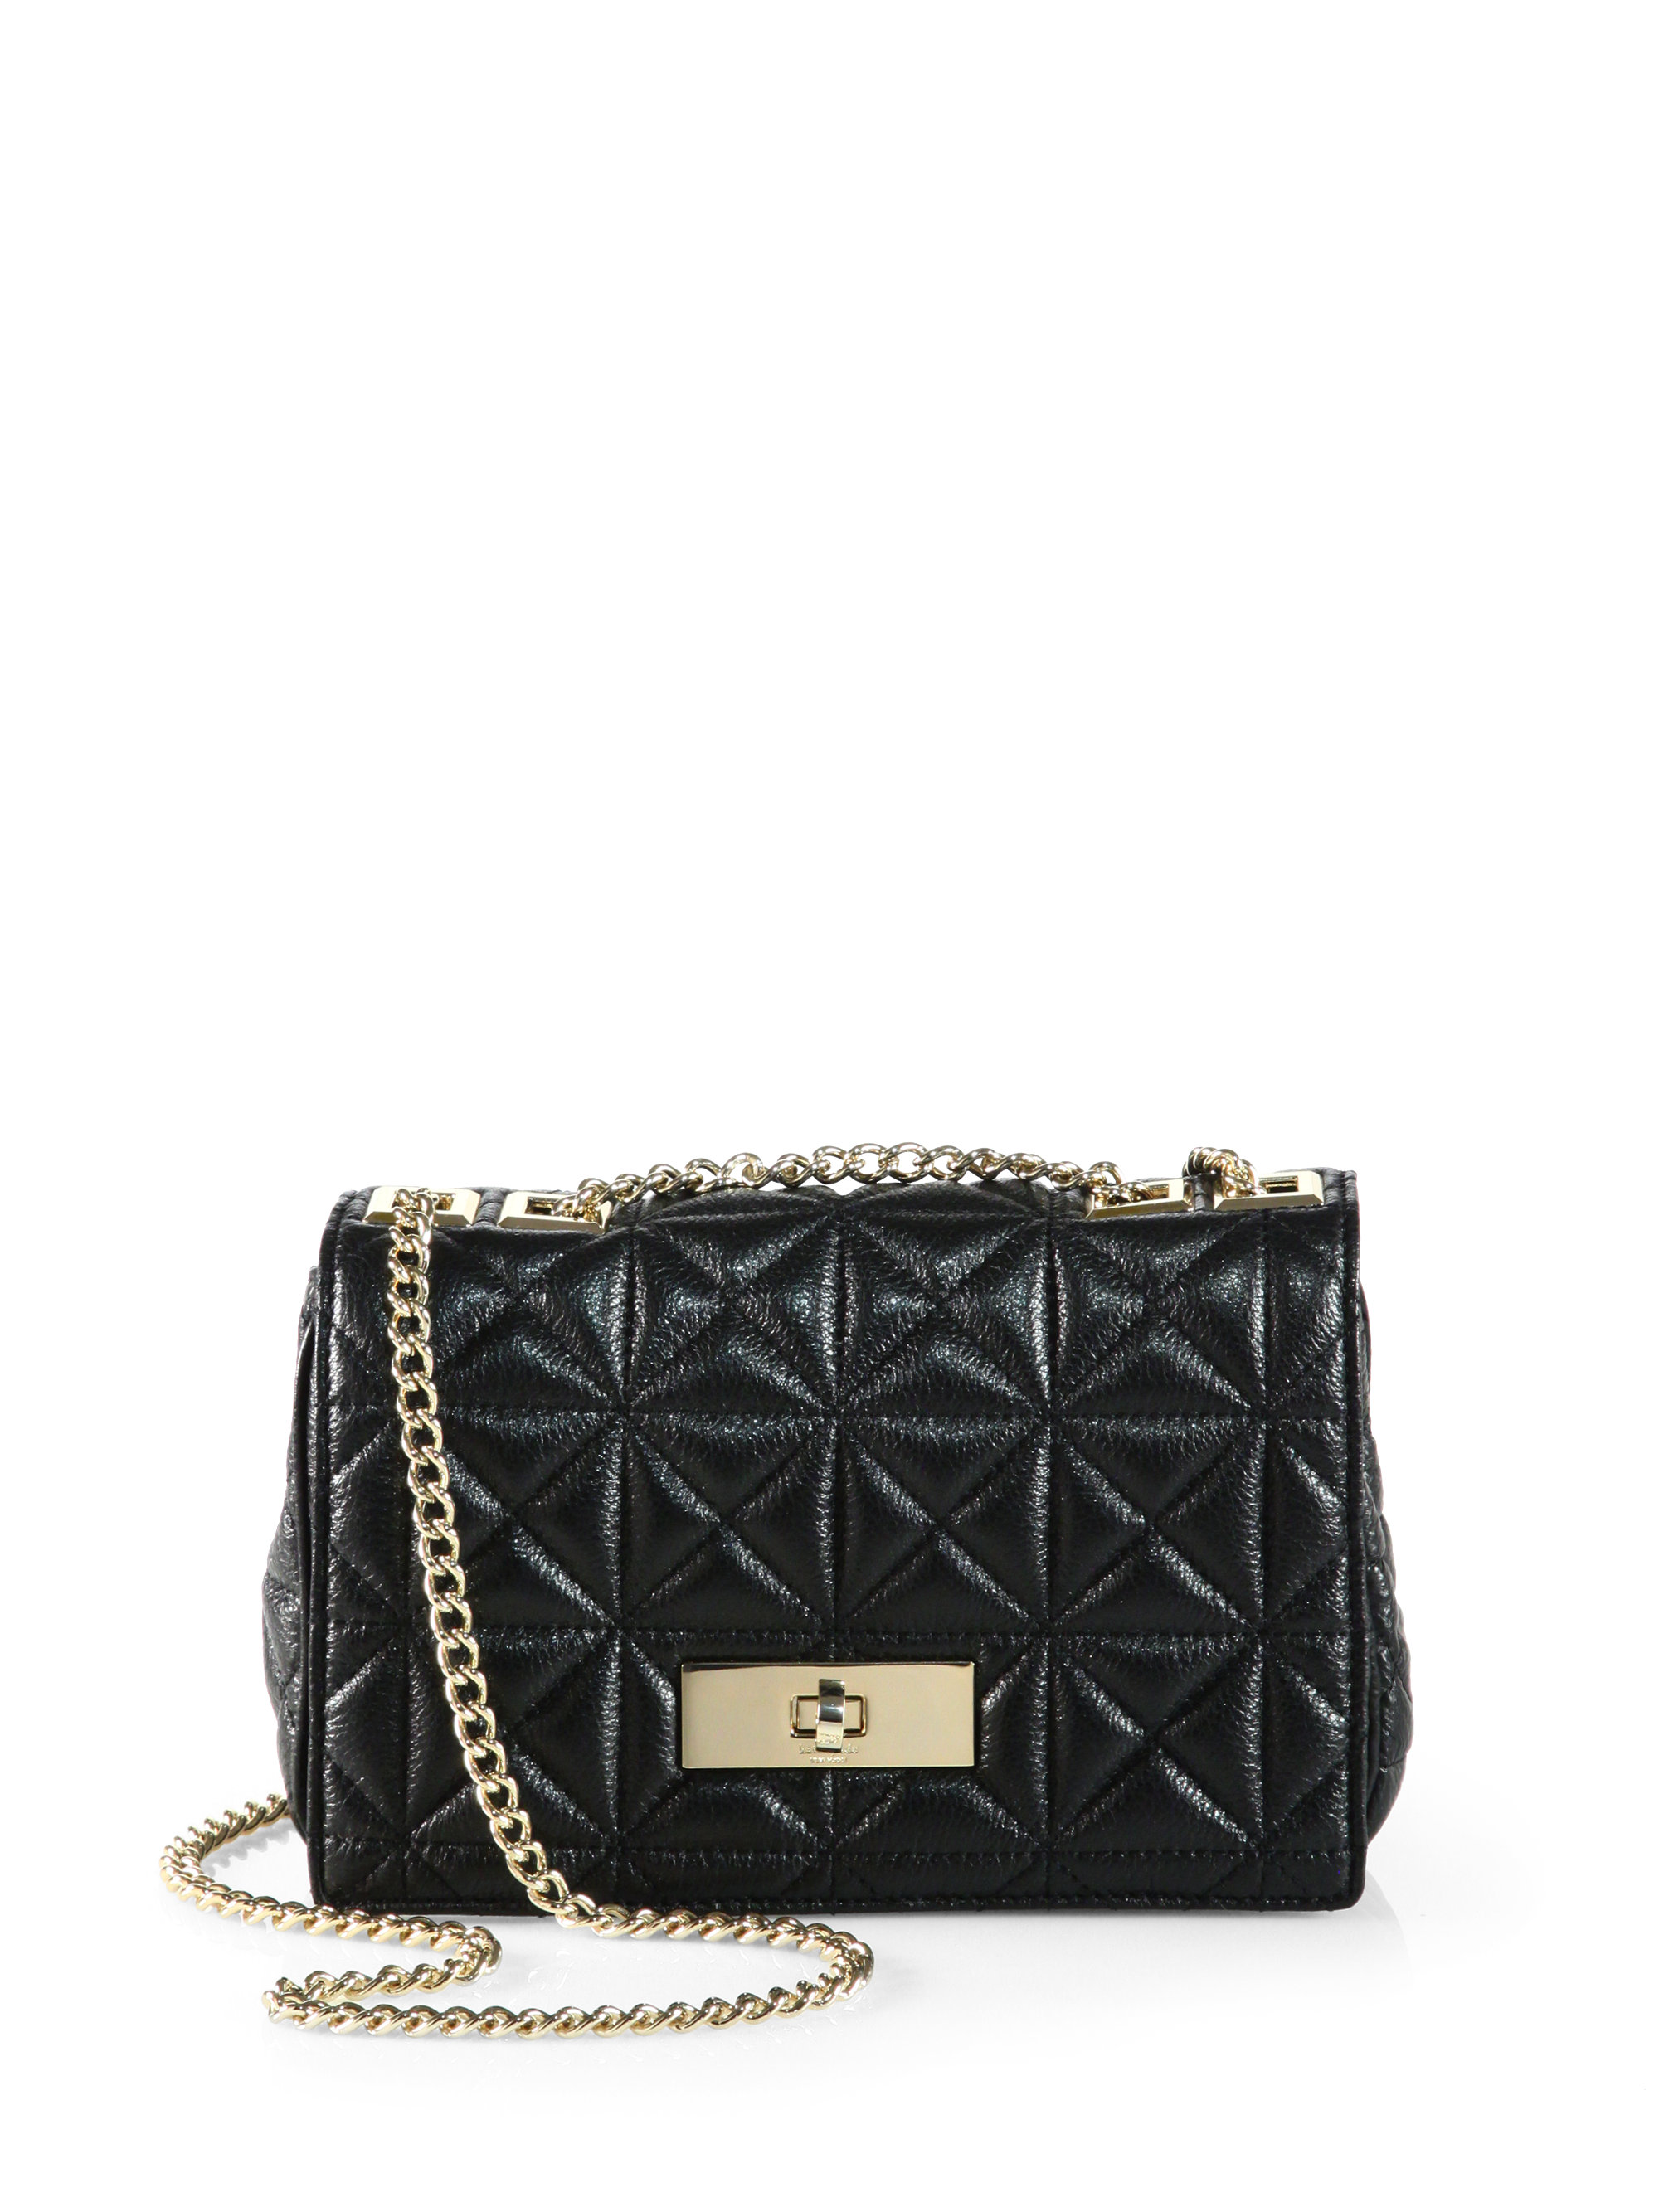 Kate Spade Sedgwick Place Fairlee Quilted Shoulder Bag in Black | Lyst